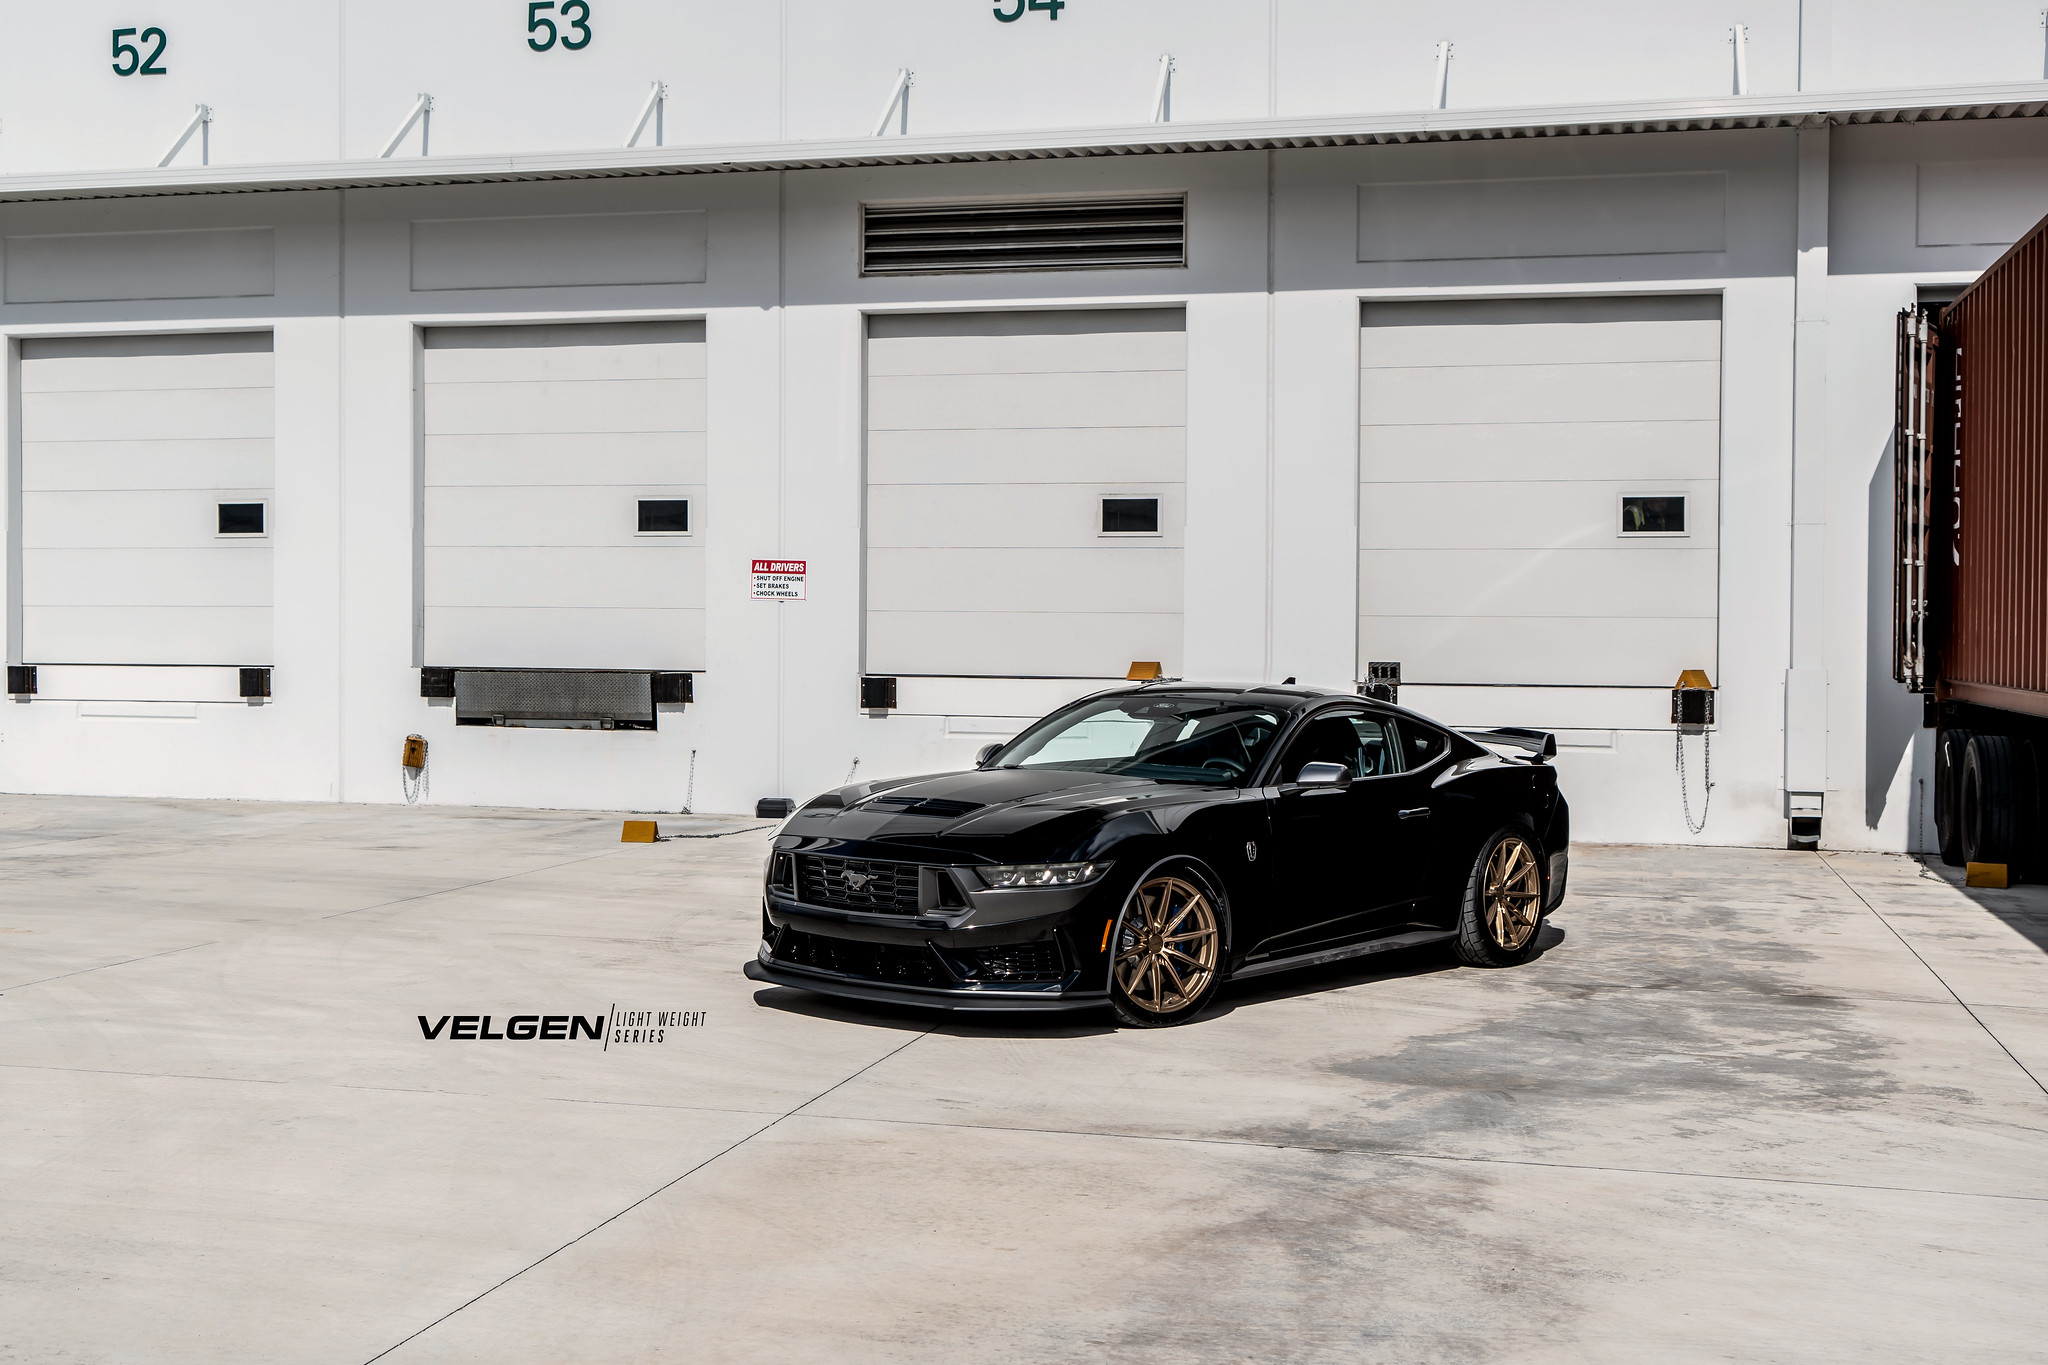 S650 Mustang 19" 20" Velgen Flow Forged Concave Wheels Mustang S650 - Vibe Motorsports Official Thread 53455459236_0e2e4283a0_k